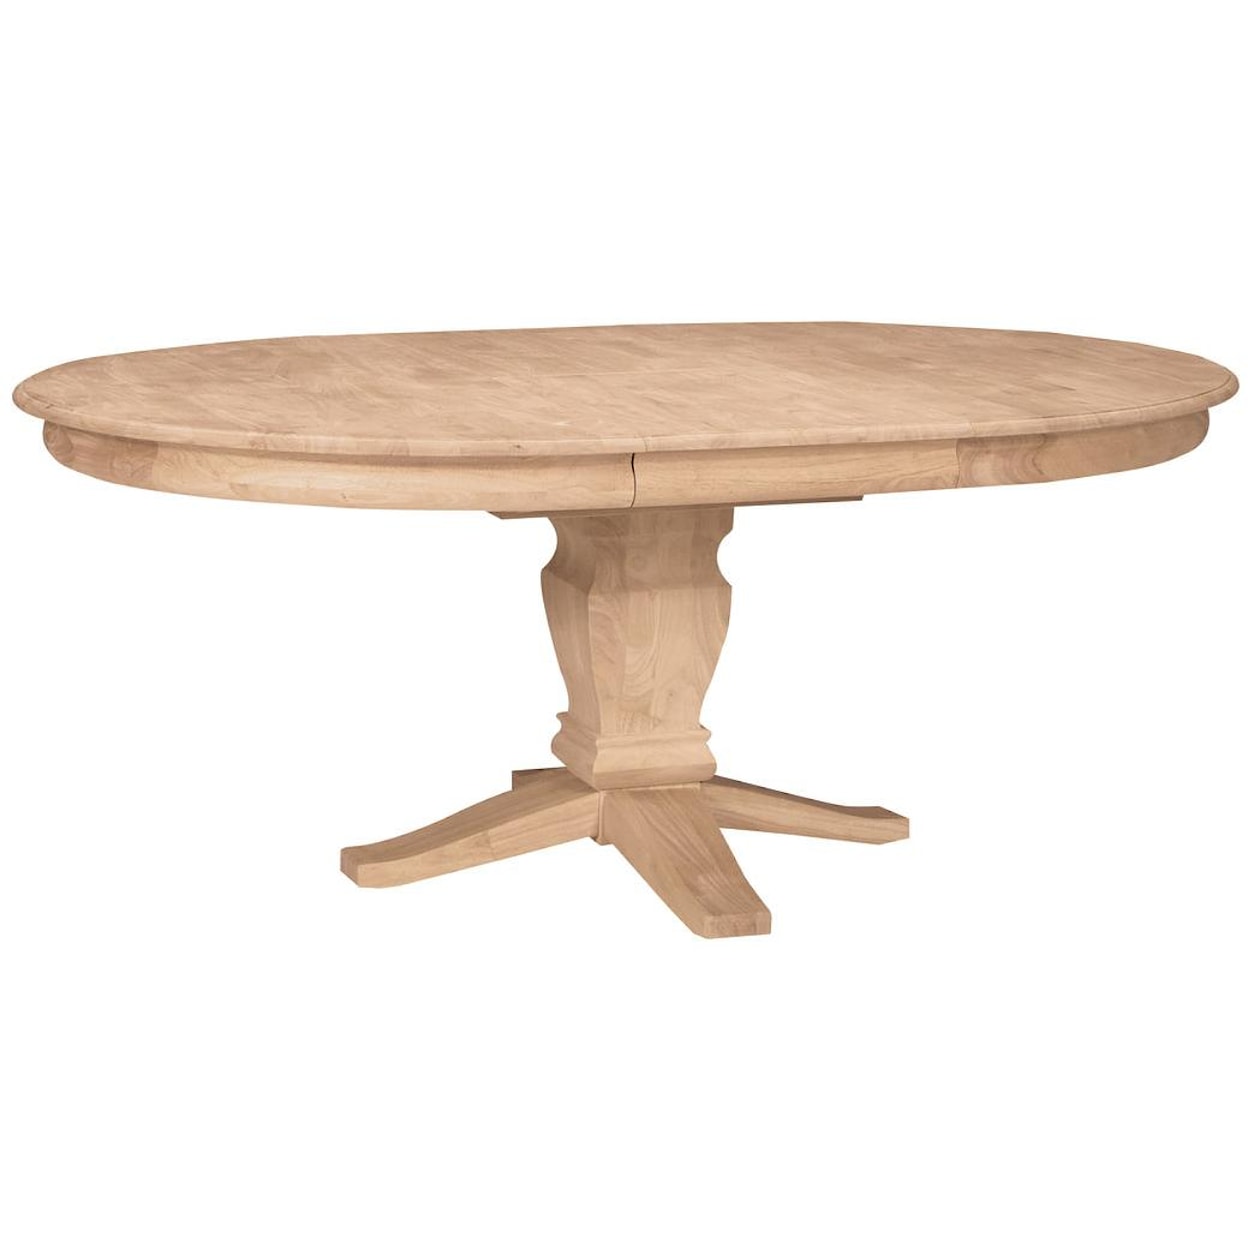 John Thomas SELECT Dining Room Butterfly Leaf Oval Pedestal Table